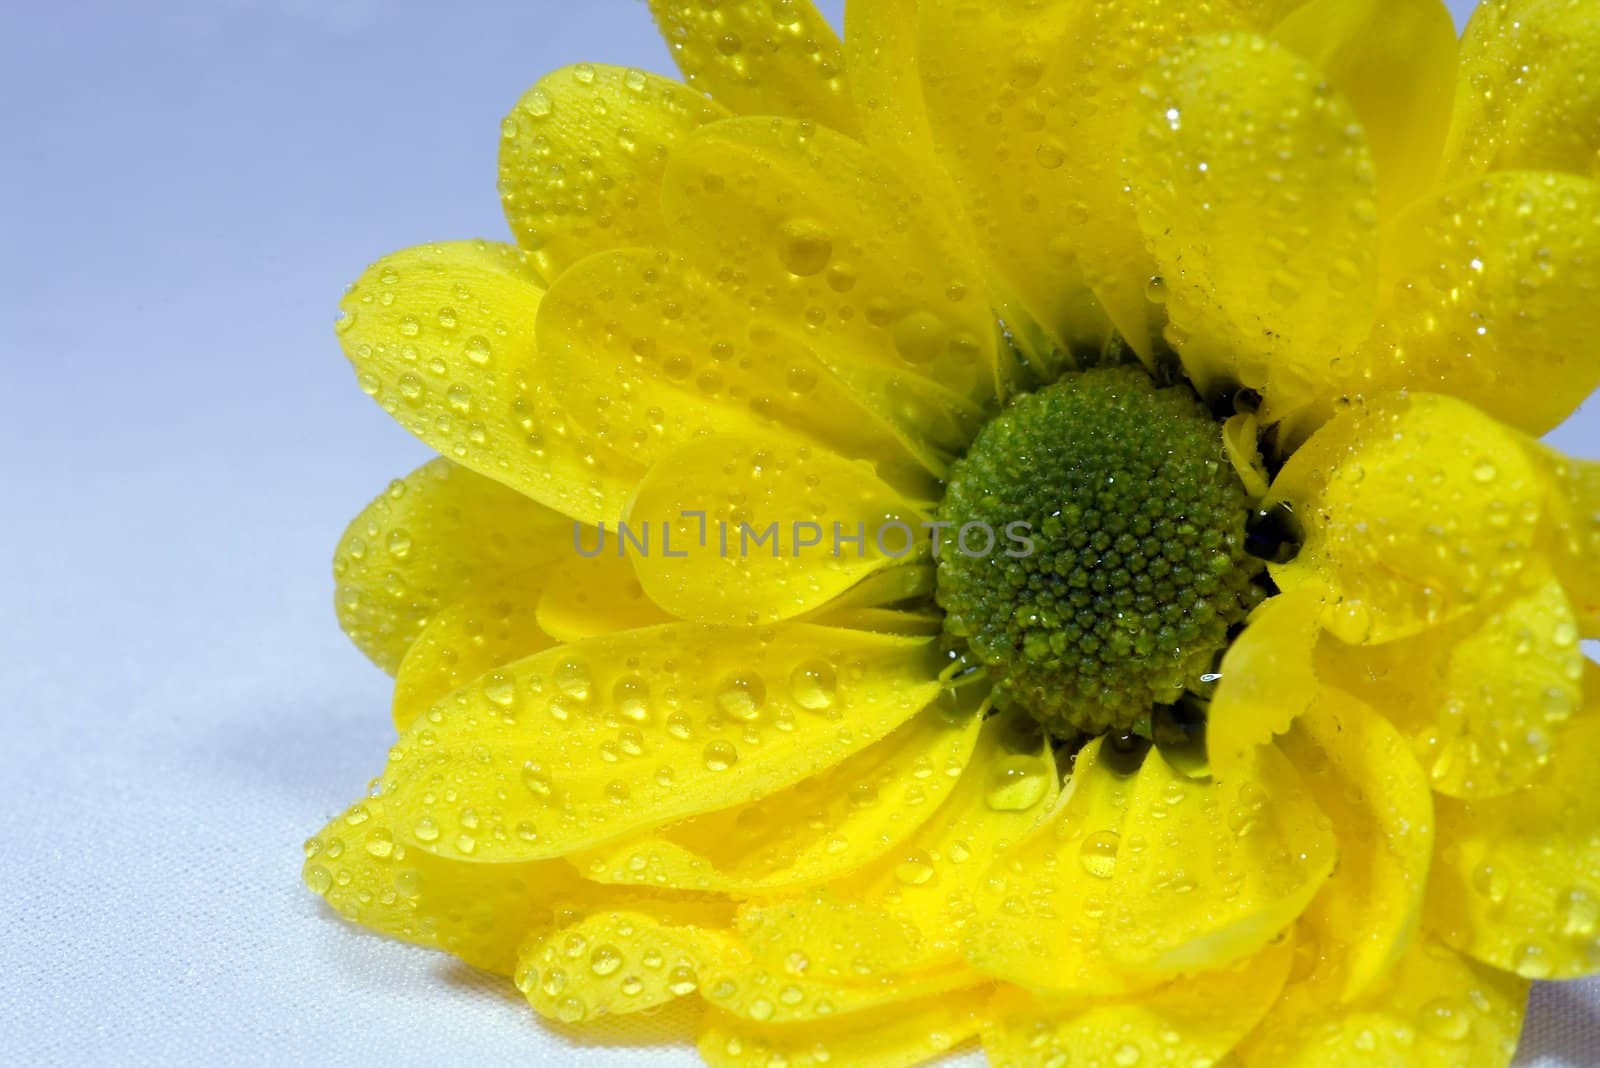 Close up of a daisy flower, isolated on white,

